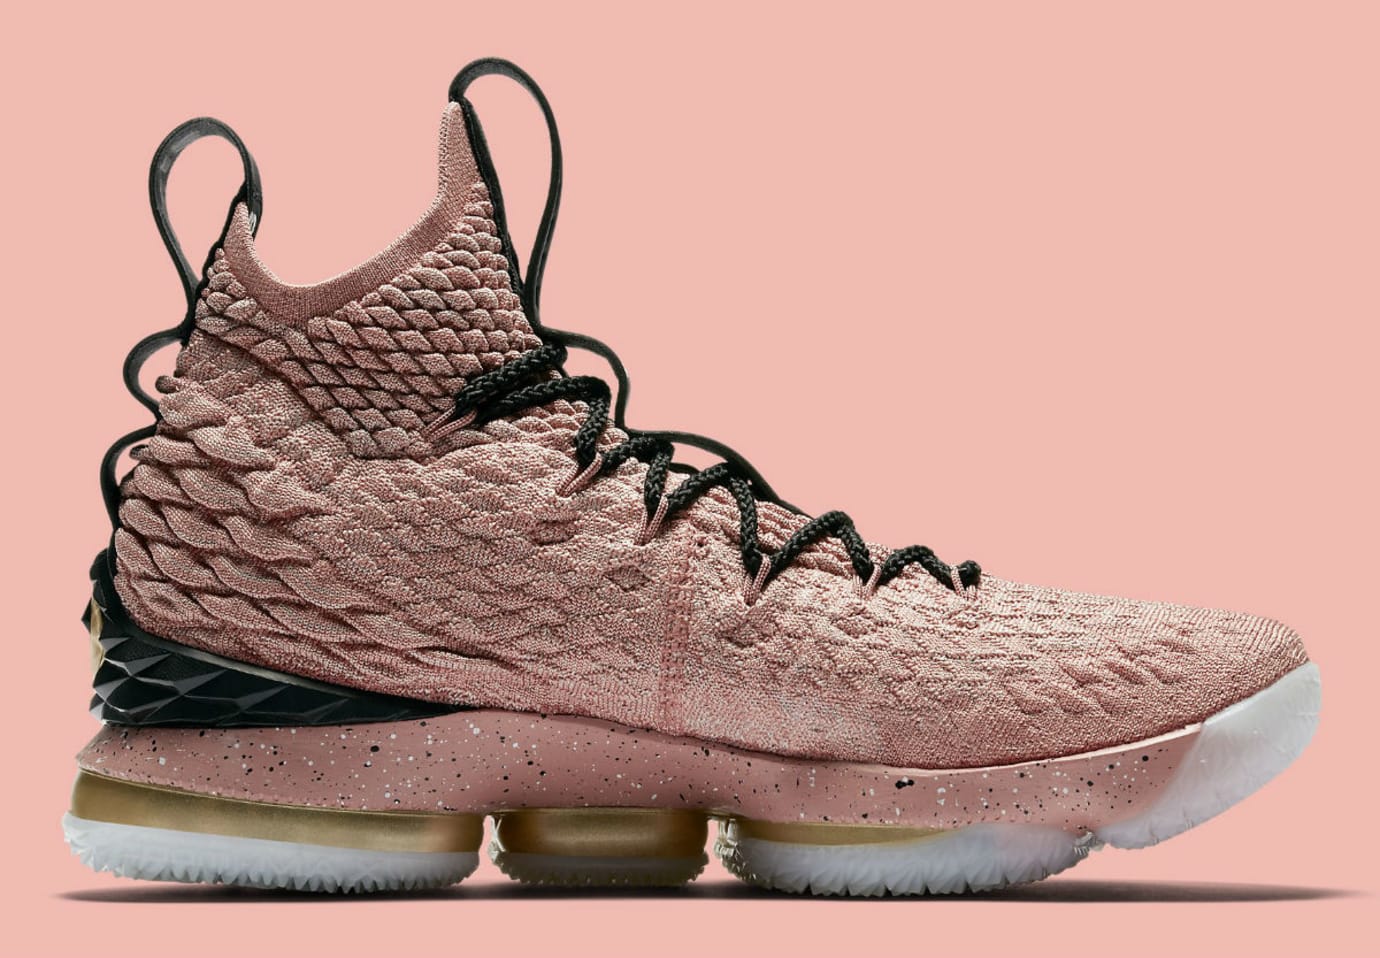 Nike LeBron 15 All-Star Pink Release Date 897650-600 Medial